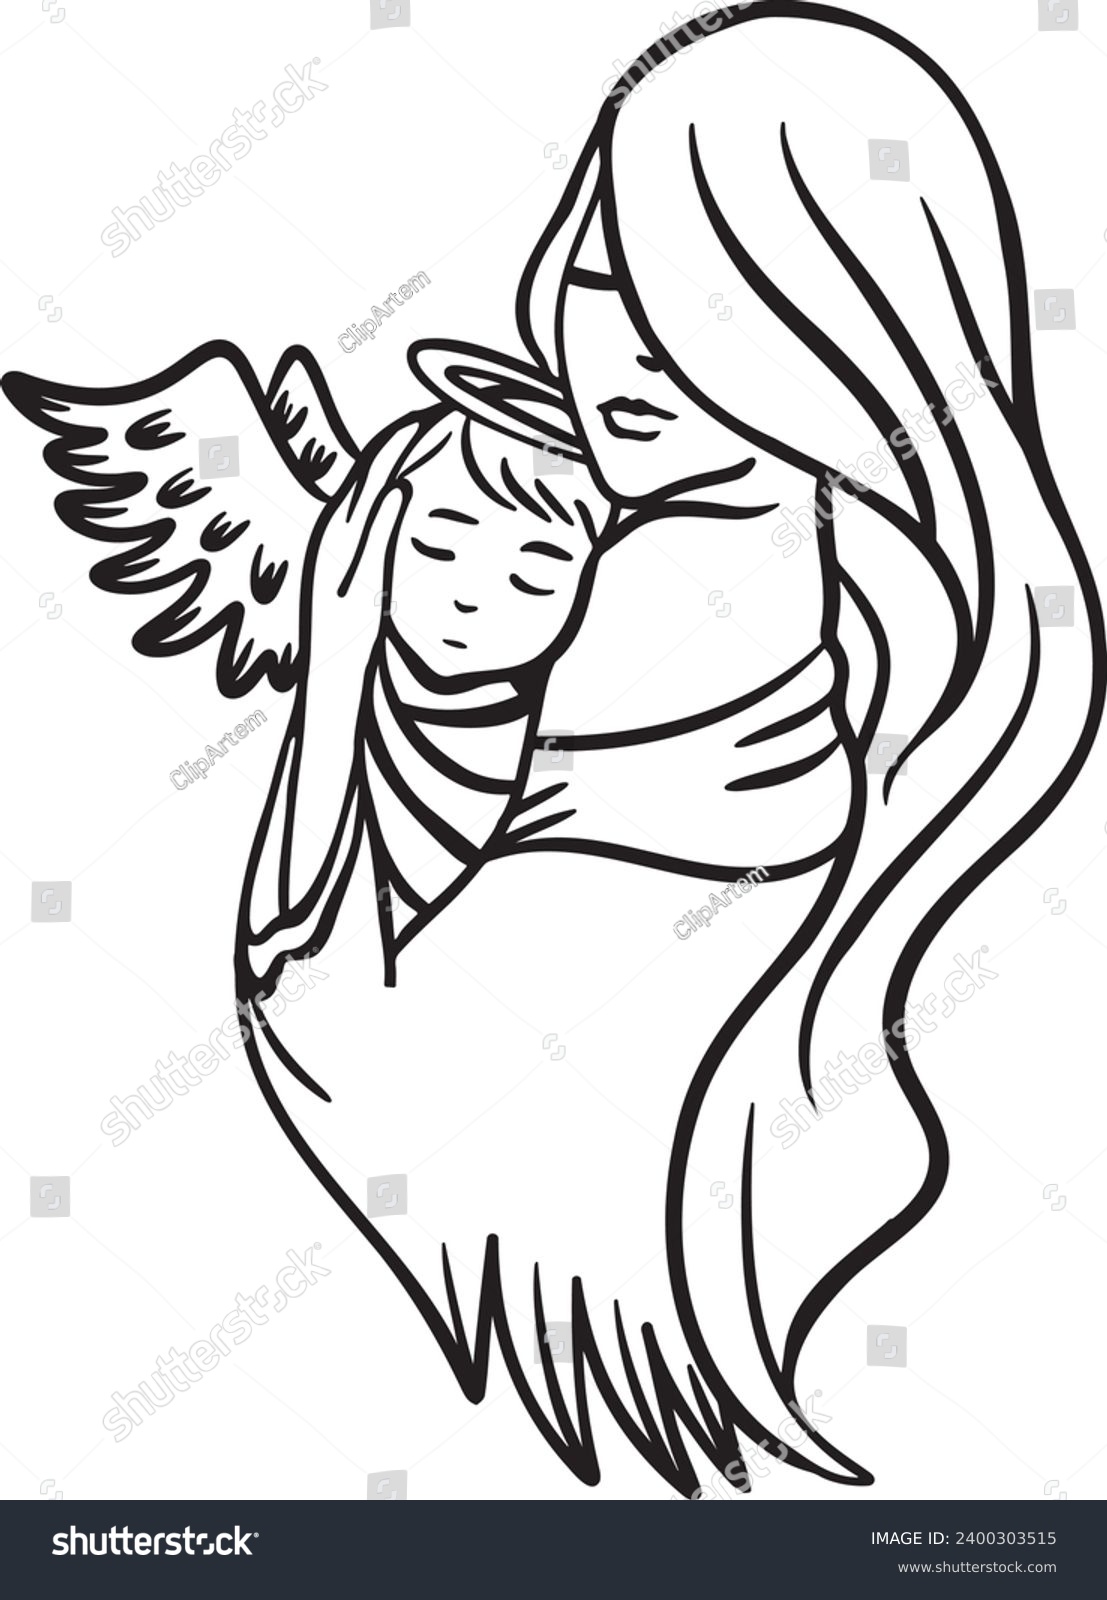 SVG of Mommy holding Baby Angel, baby loss vector image for gift decor wall art, baby with wings svg